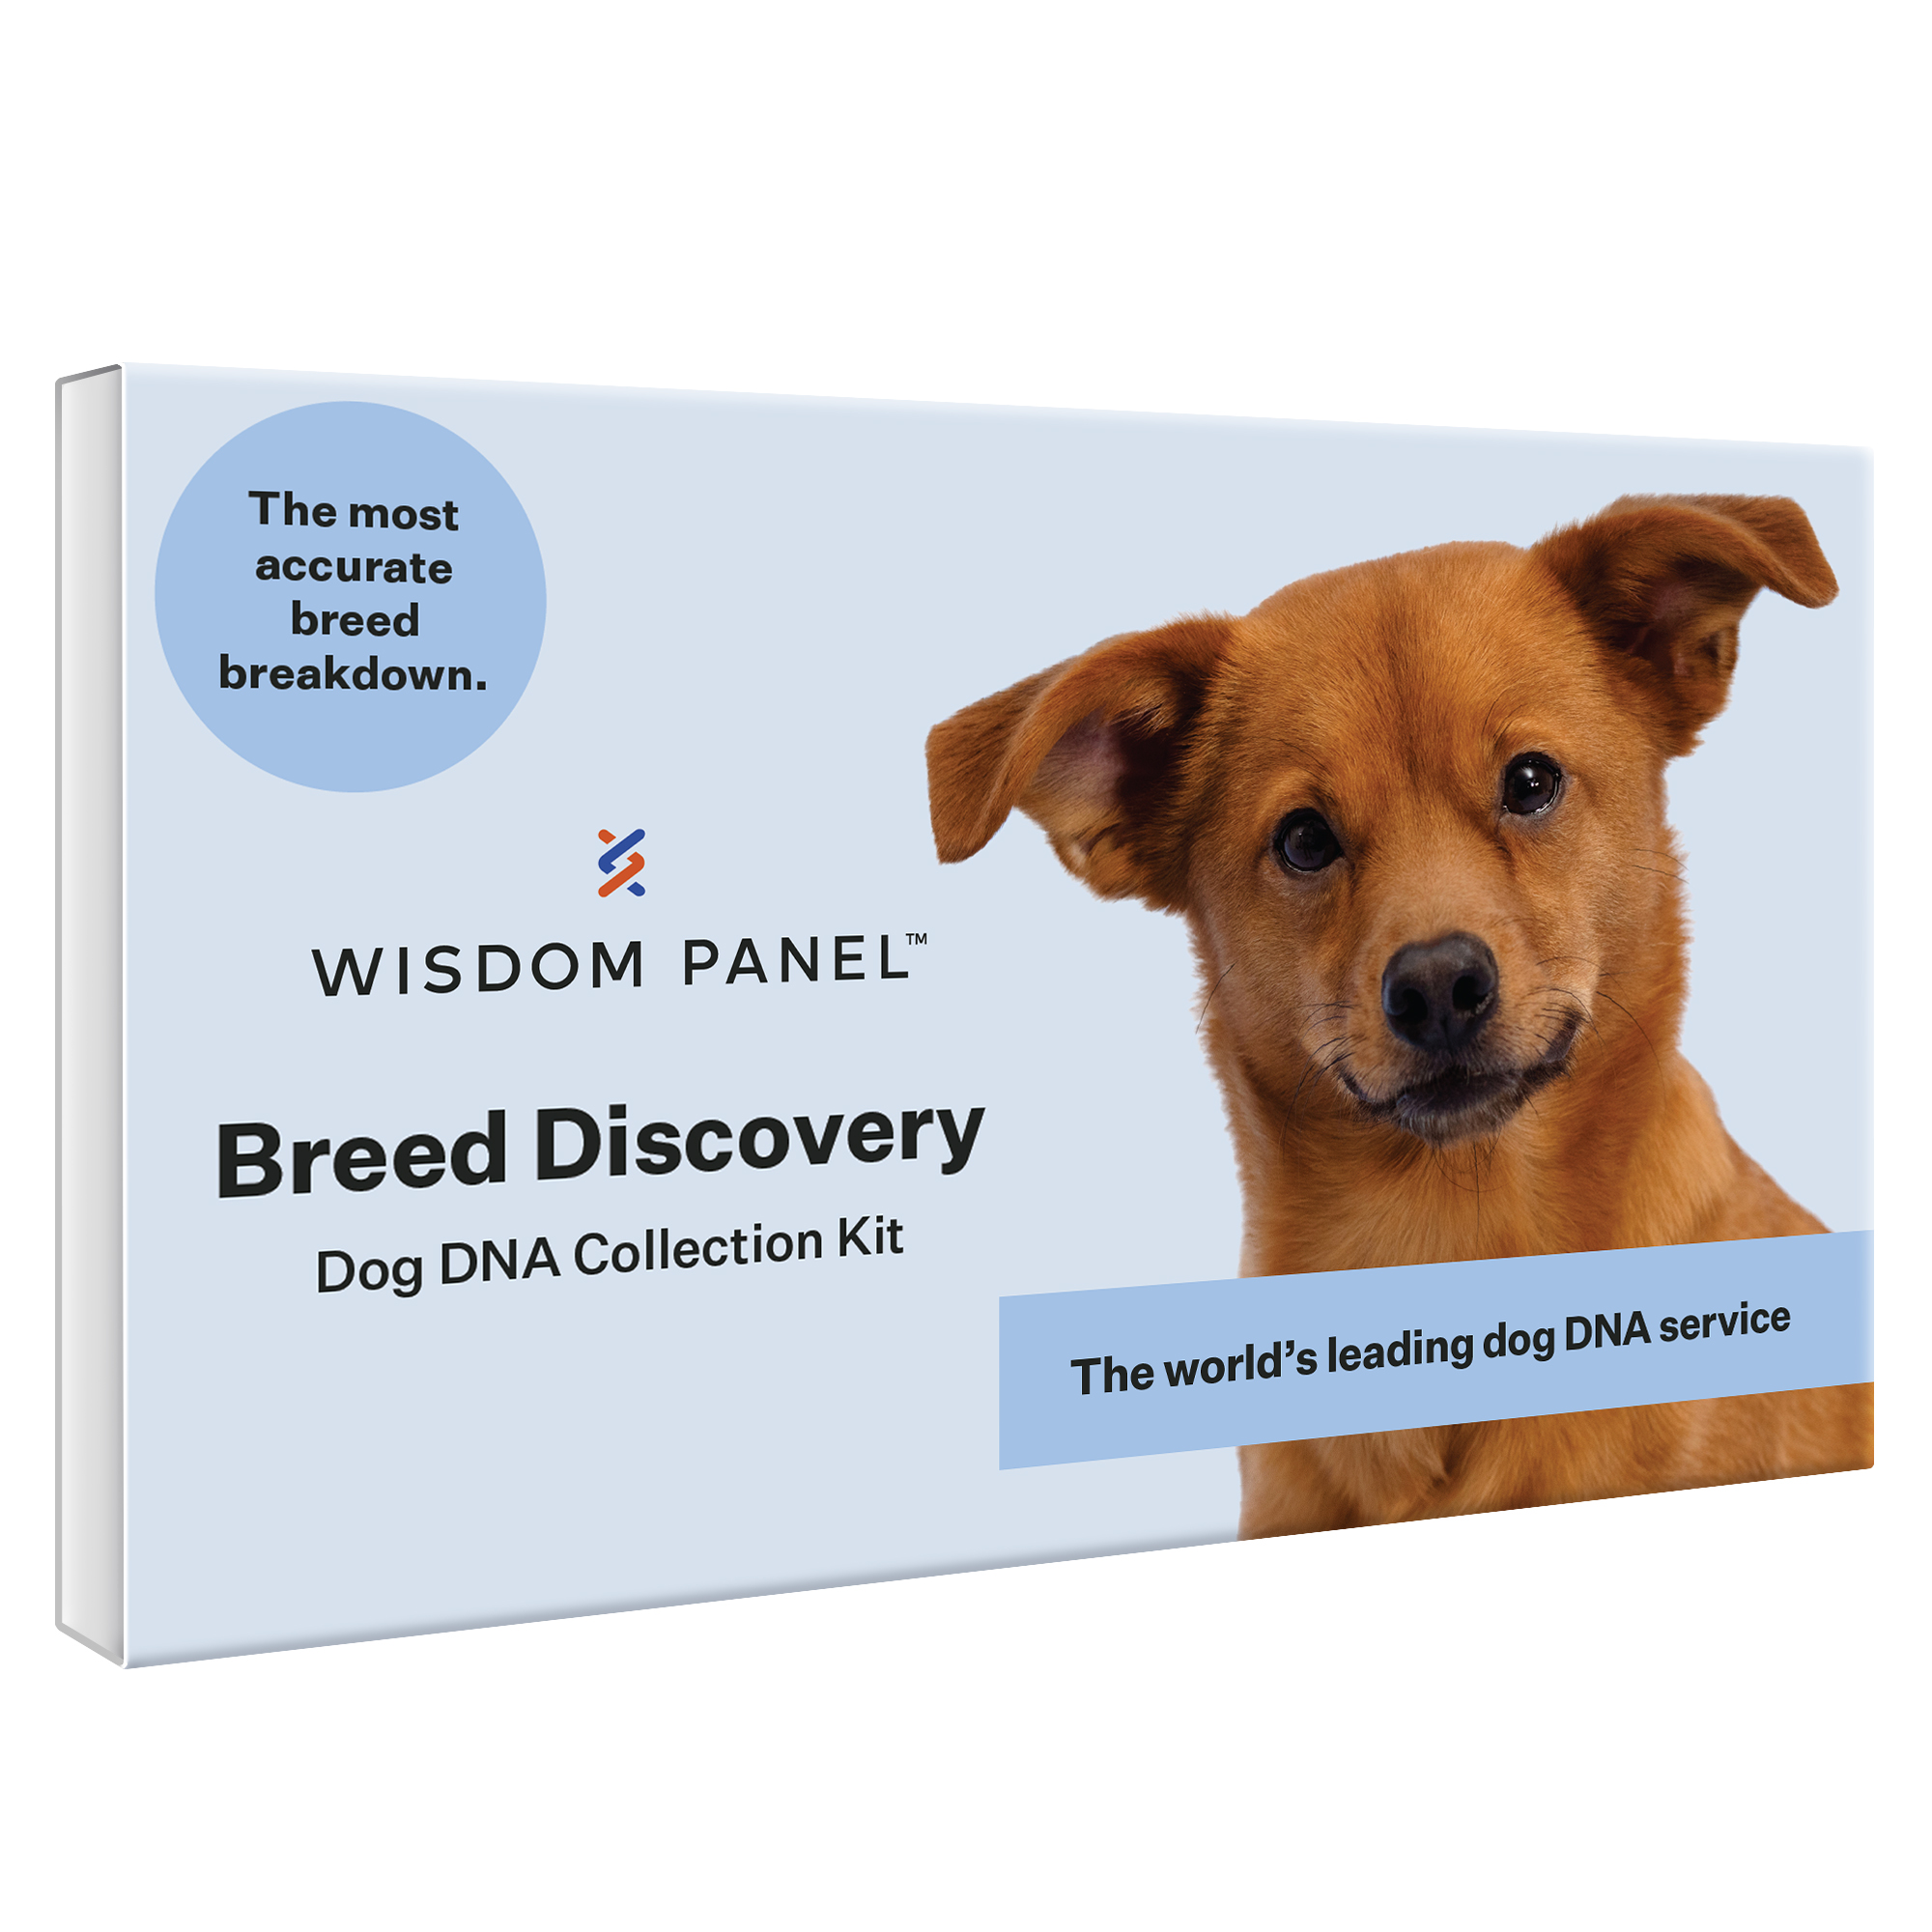 Wisdom Panel Breed Discovery, Breed Identification, Dog DNA Test Kit - image 1 of 8